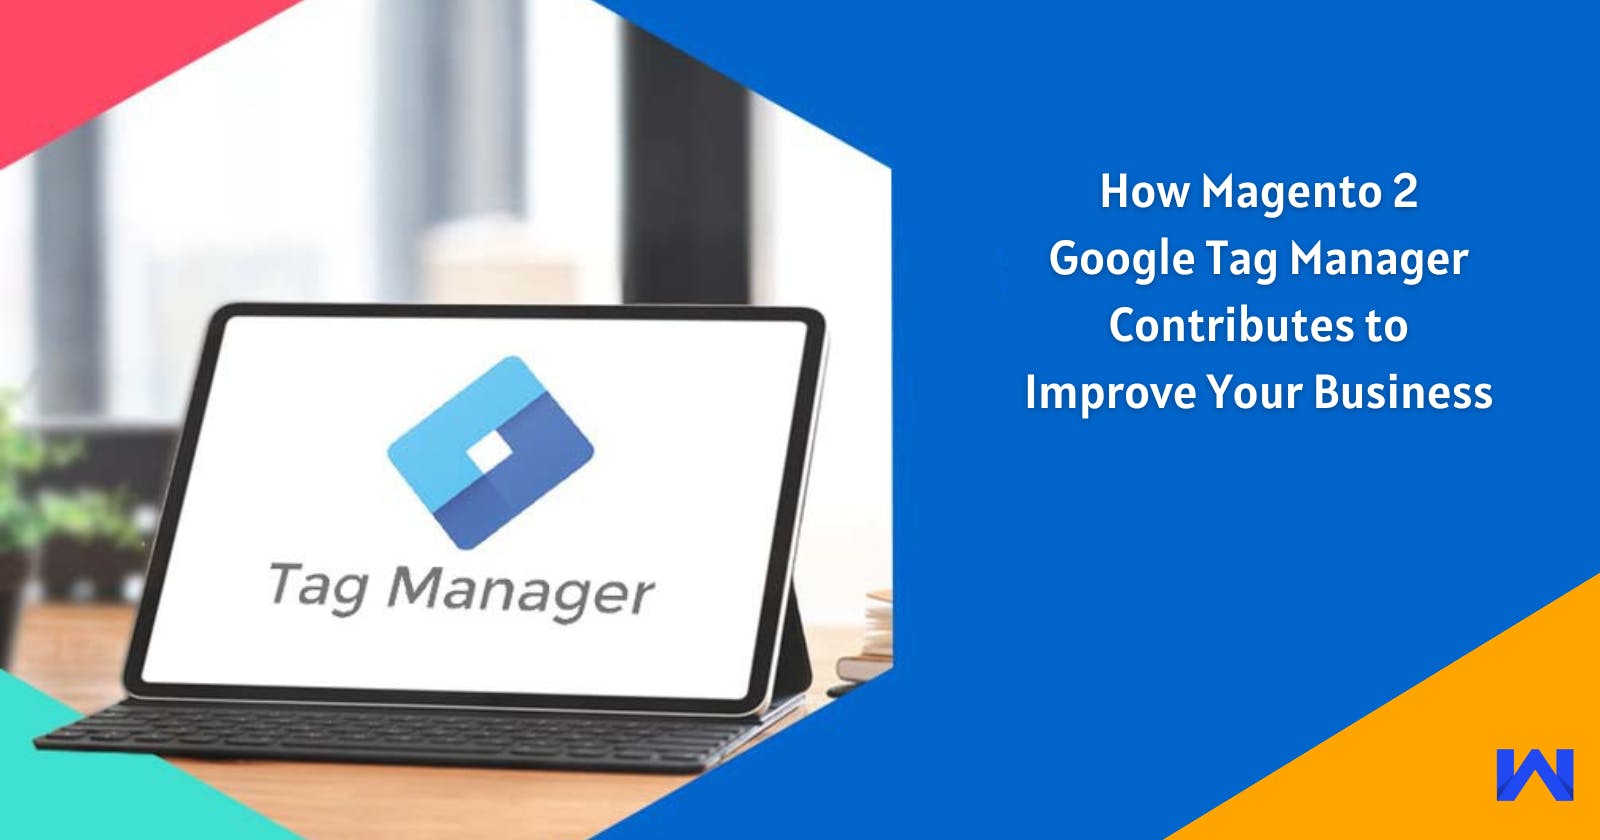 How Magento 2 Google Tag Manager Contributes to Improve Your Business